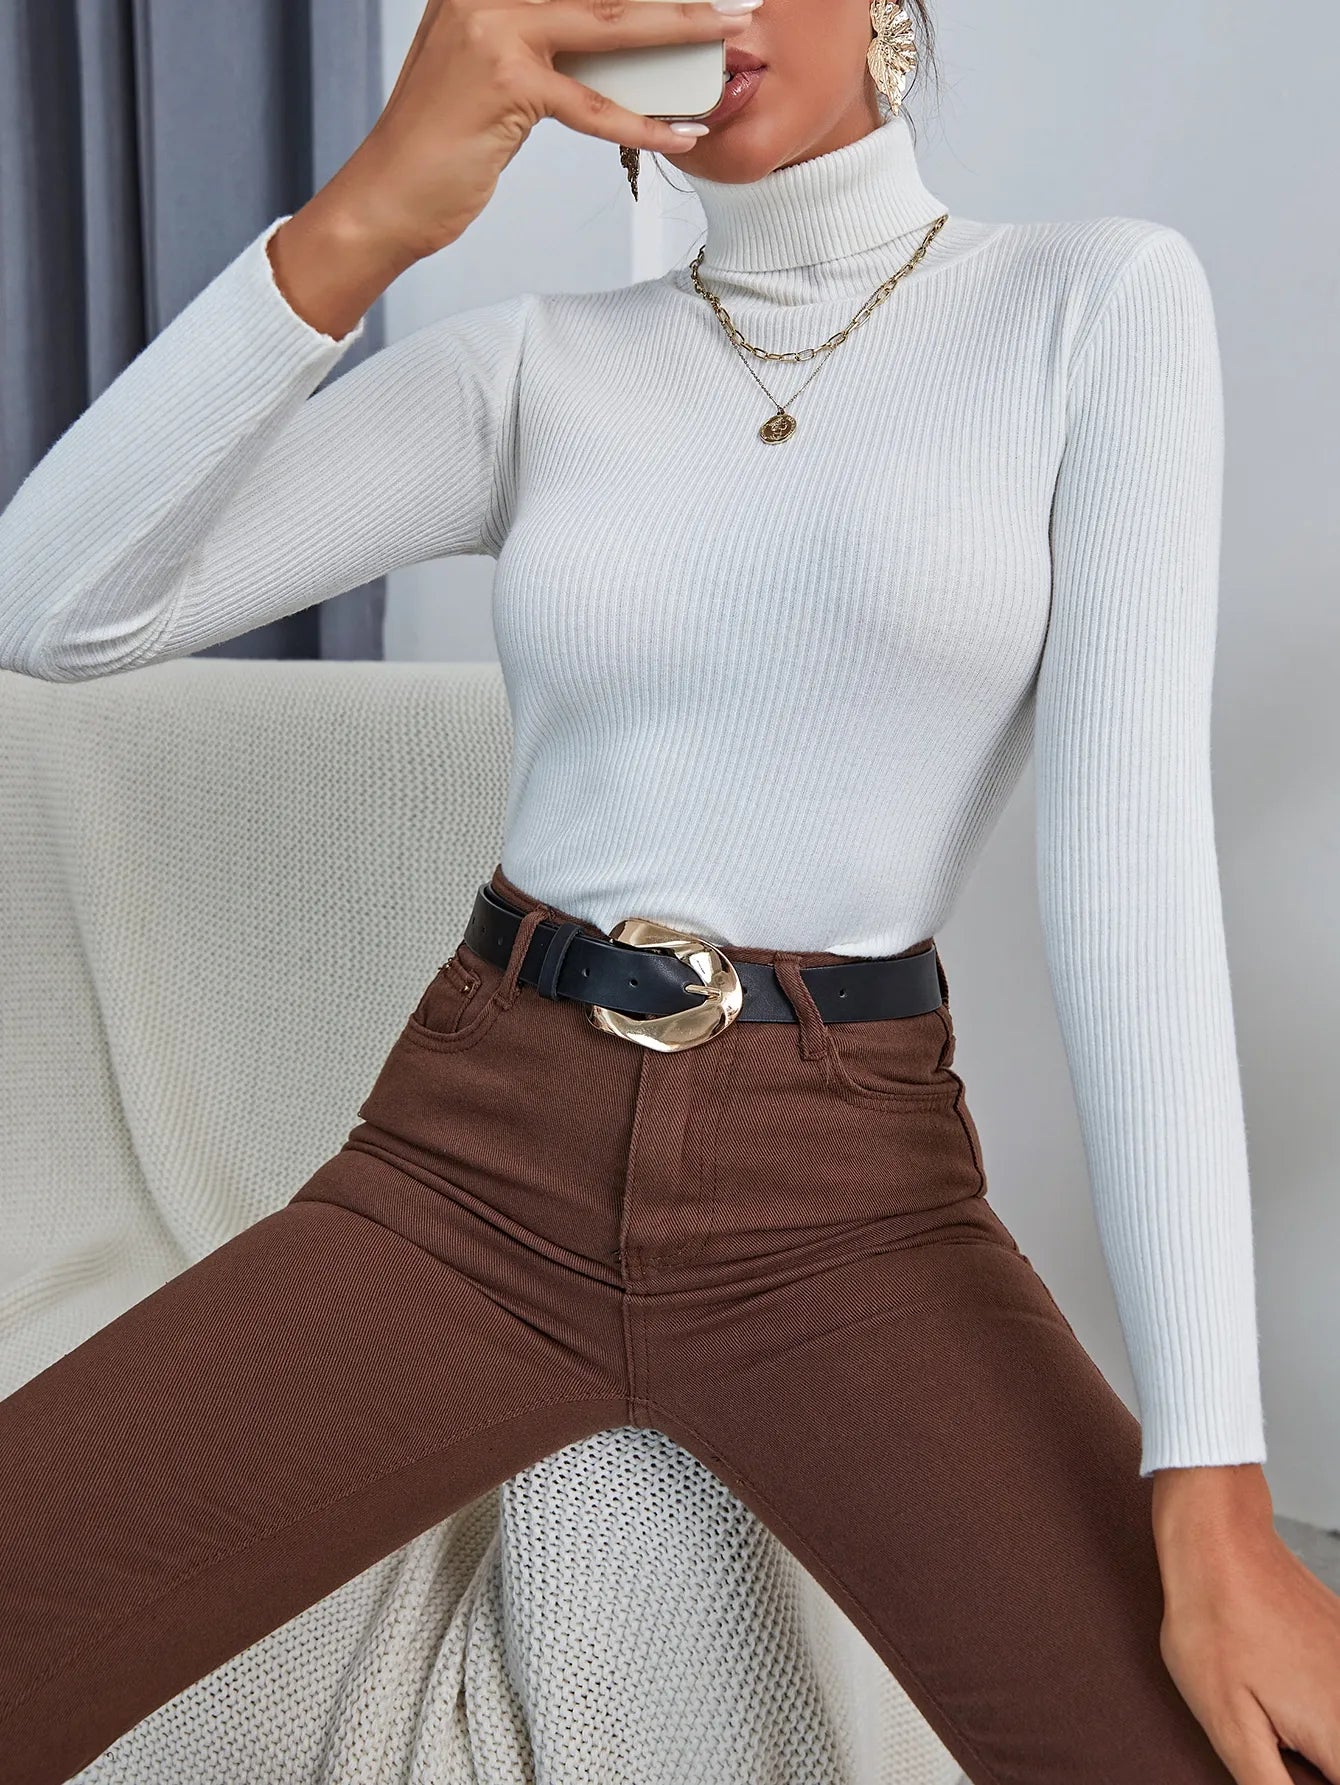 Rib Knit Foldover Turtleneck Pull Sweater Casual Soft Jumper Stretch  Top Bottoming Shirt